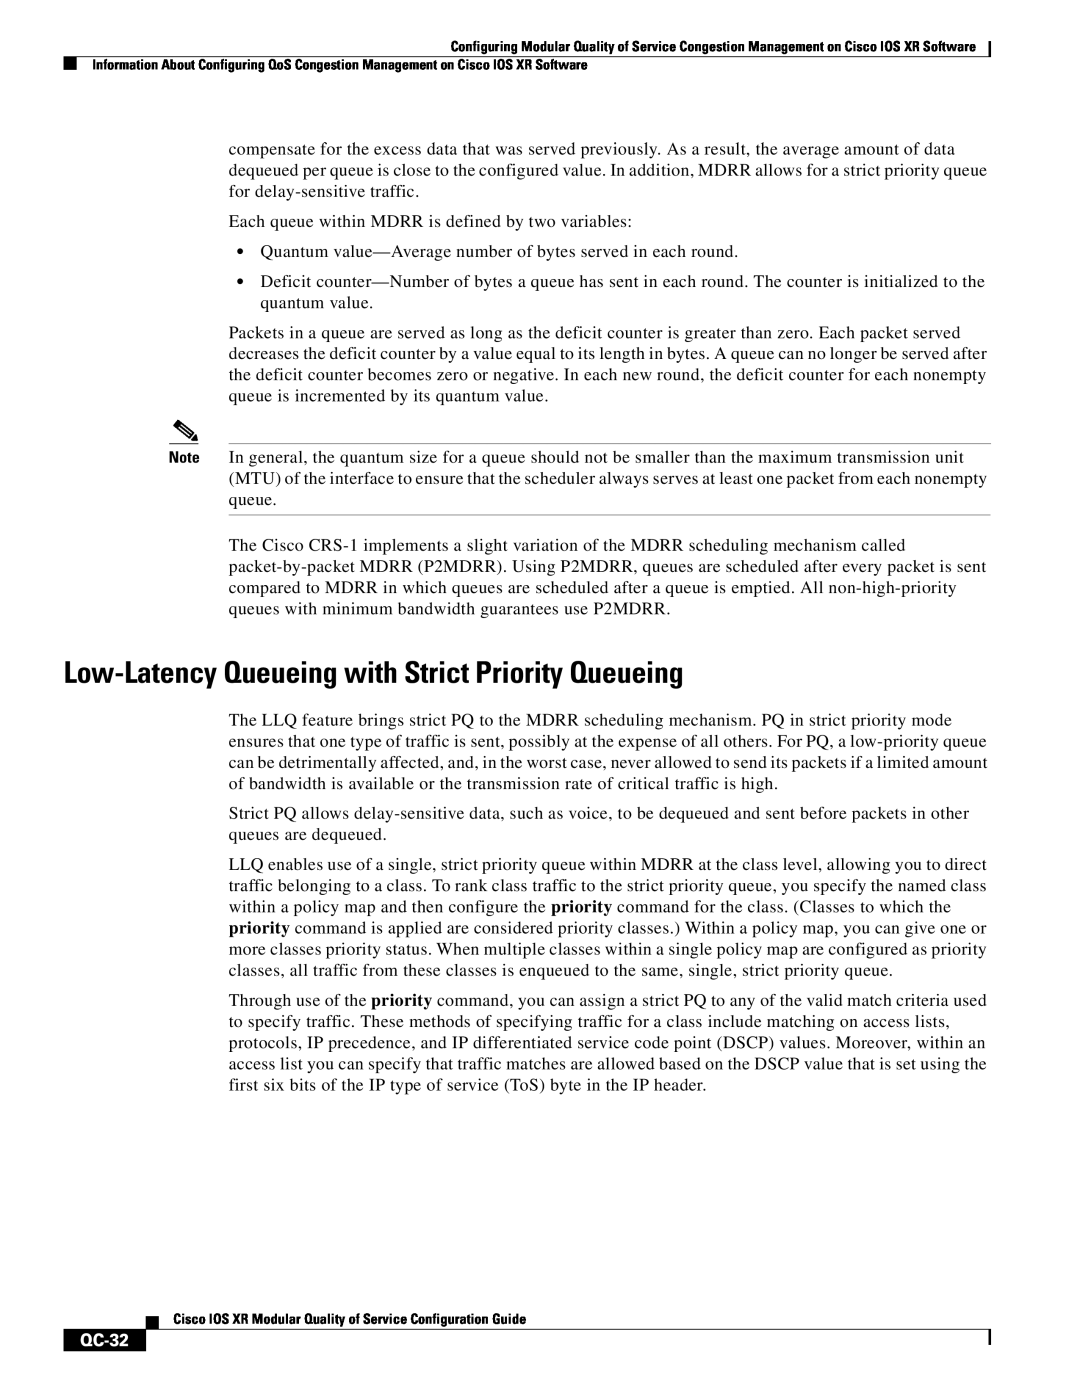 Cisco Systems QC-29 manual Low-Latency Queueing with Strict Priority Queueing, QC-32 